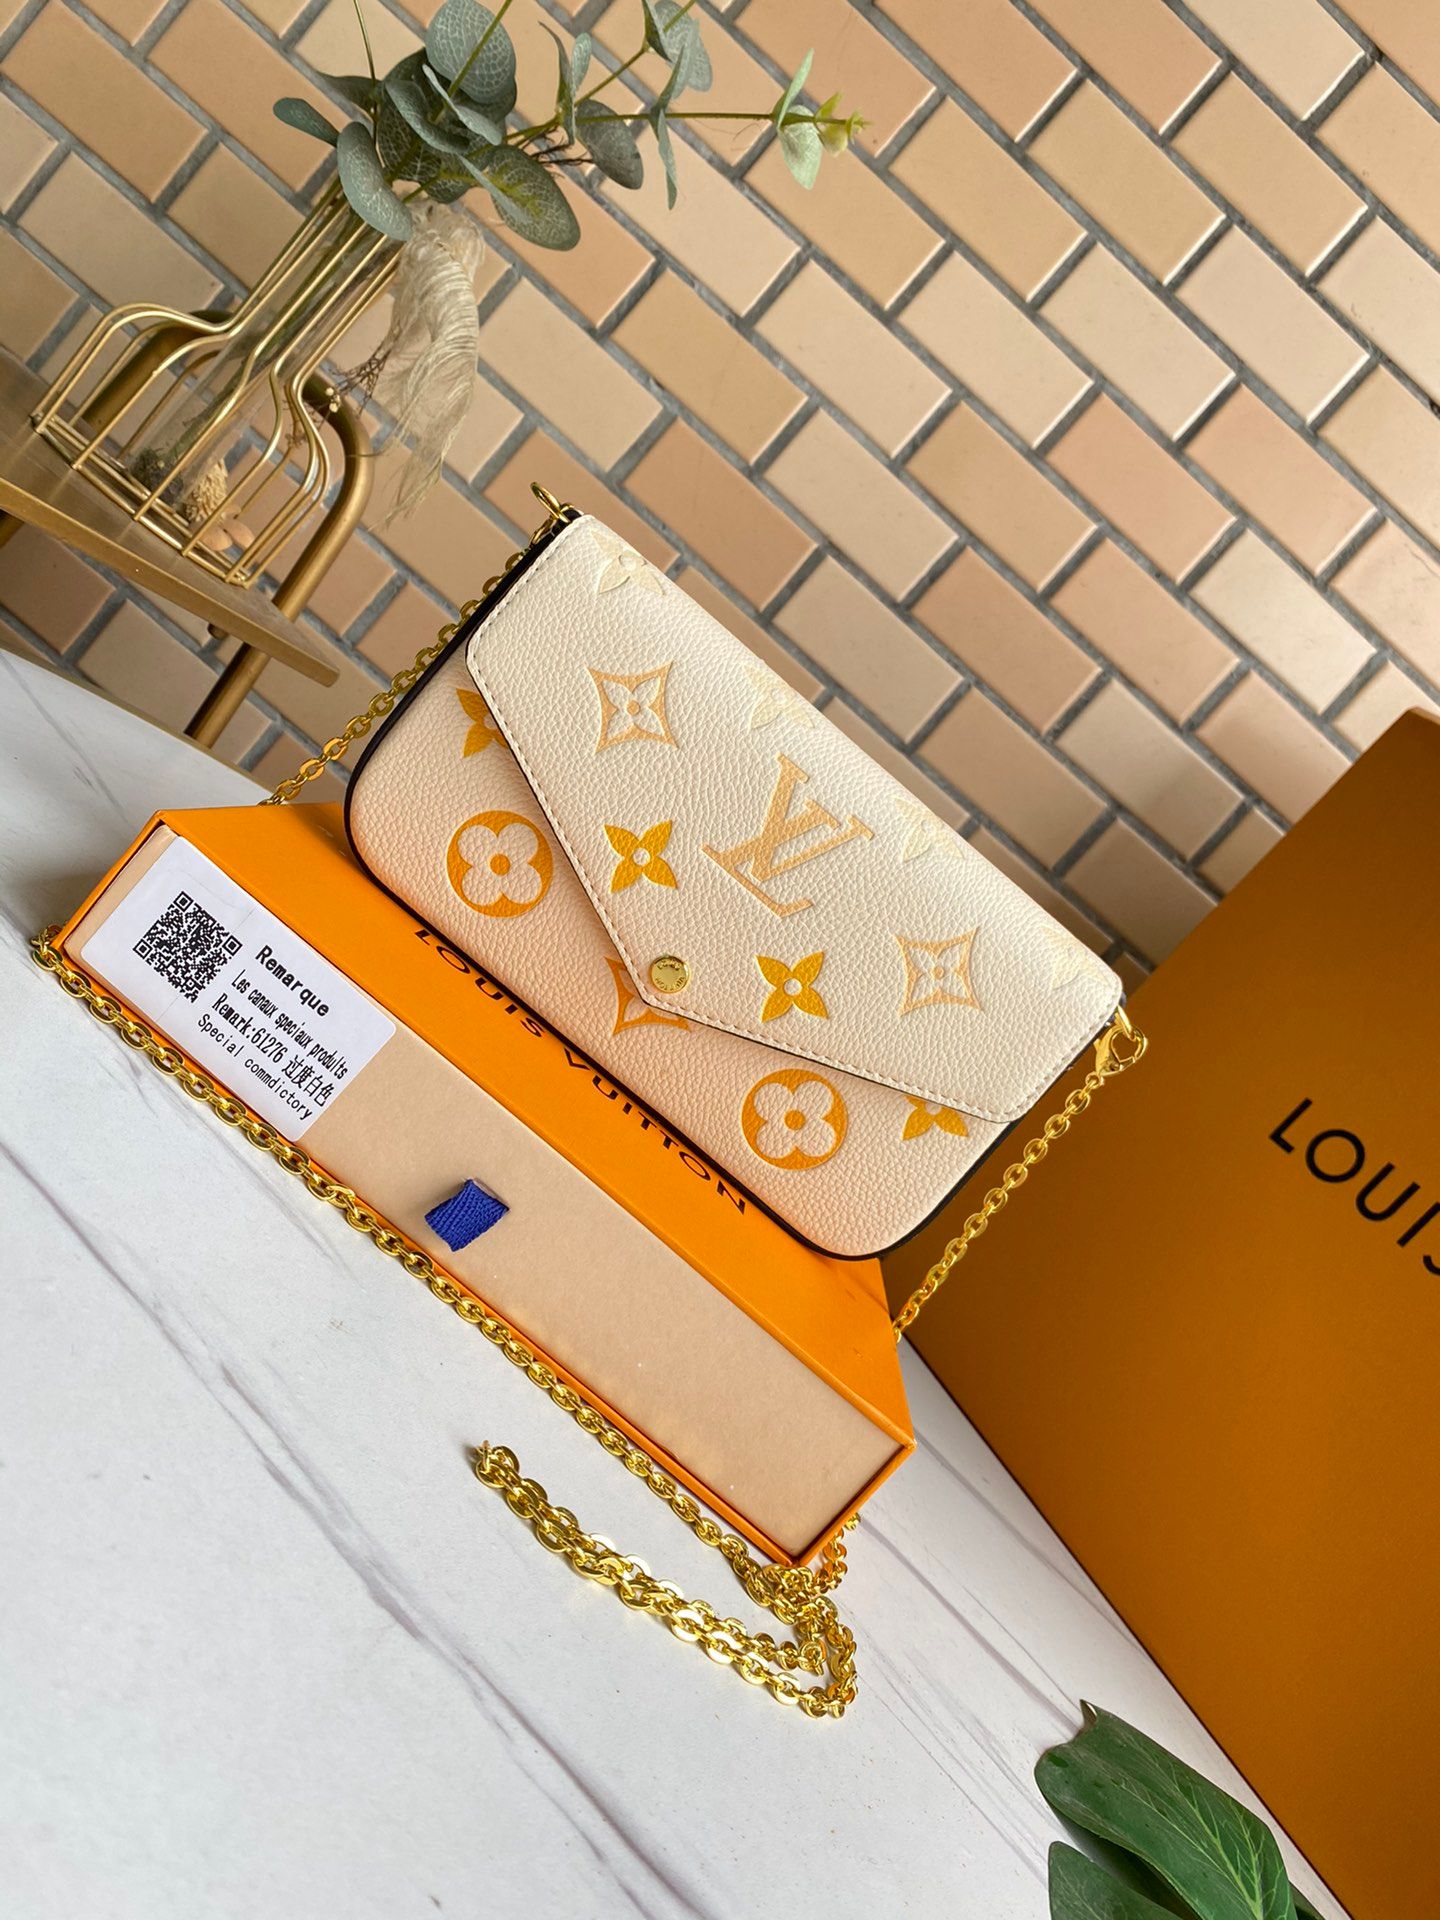 Louis Vuitton Women Cross Body Leather Handbag Evening Bag Original LV Box  3 In 1 High Quality Flower Checkers Date Code Serial Number From 48,41 €